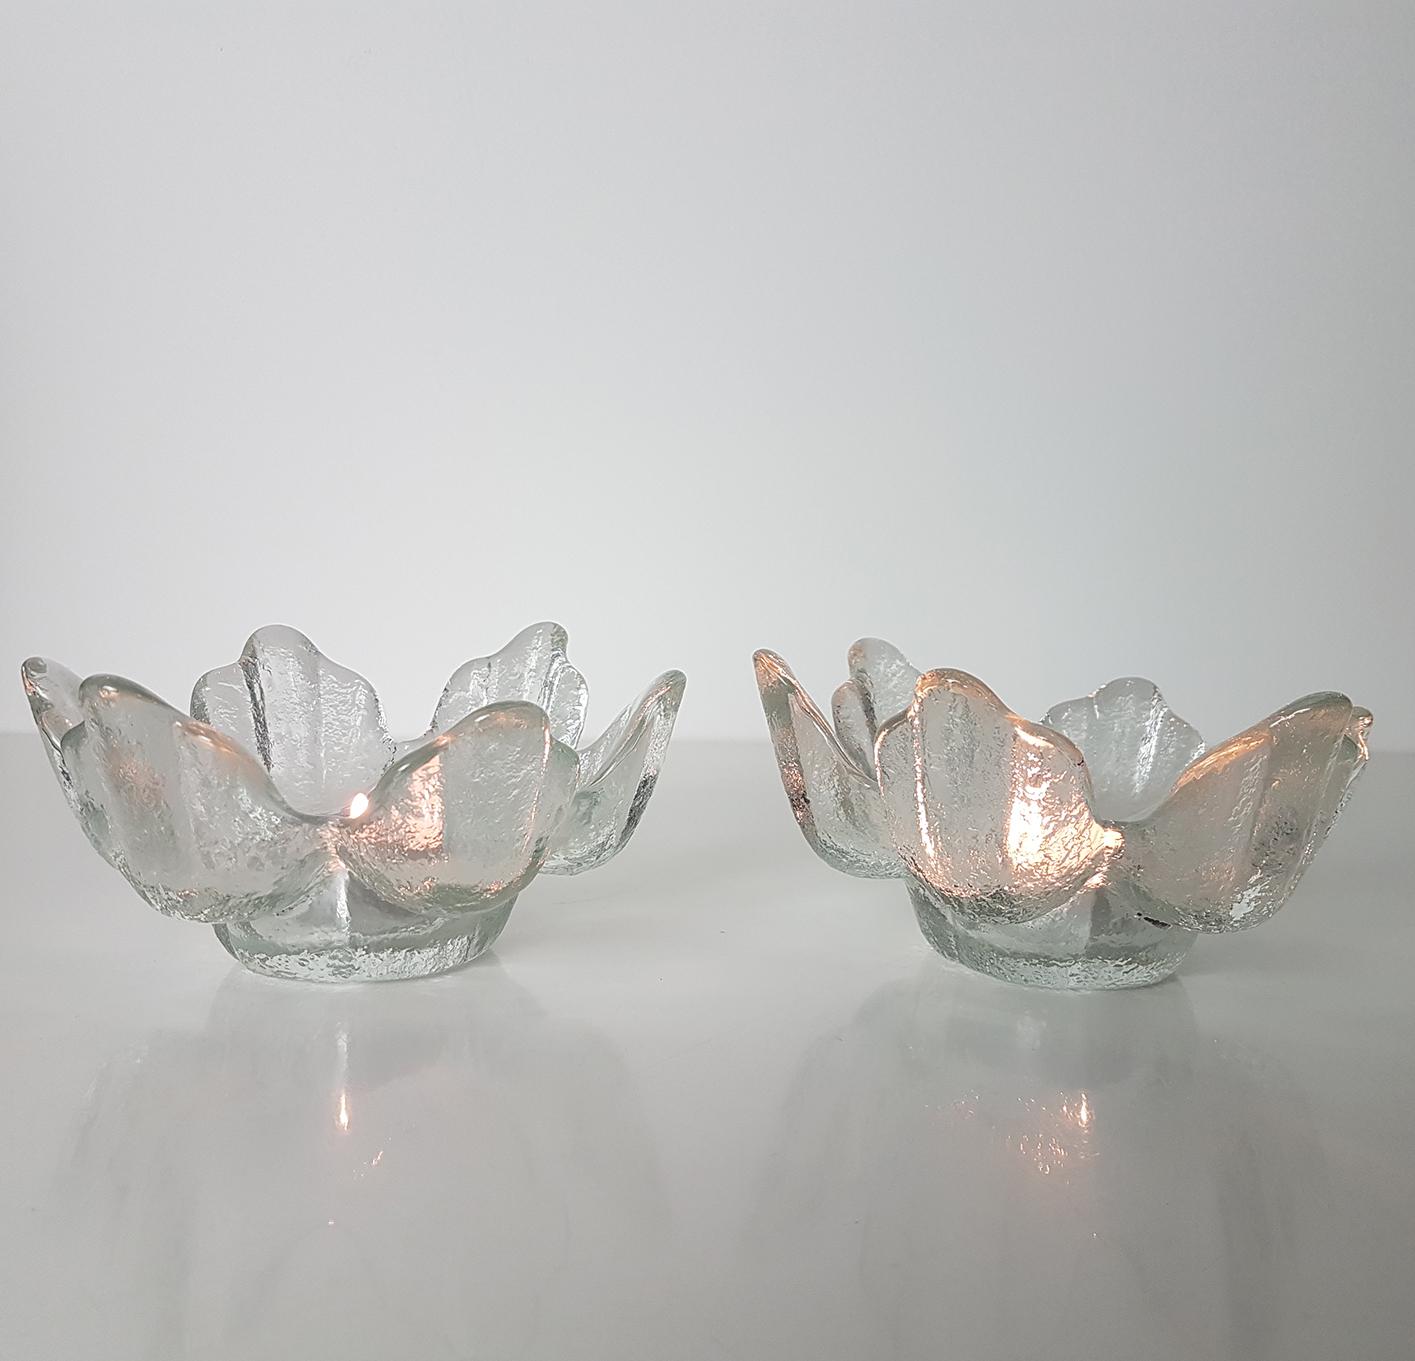 This pair of votive candleholders designed by by Ravenhead, England are heavy, substantial and gorgeous. Inspired by nature. Also gorgeous on a holiday table!

Quite heavy, excellent condition, no damage.

